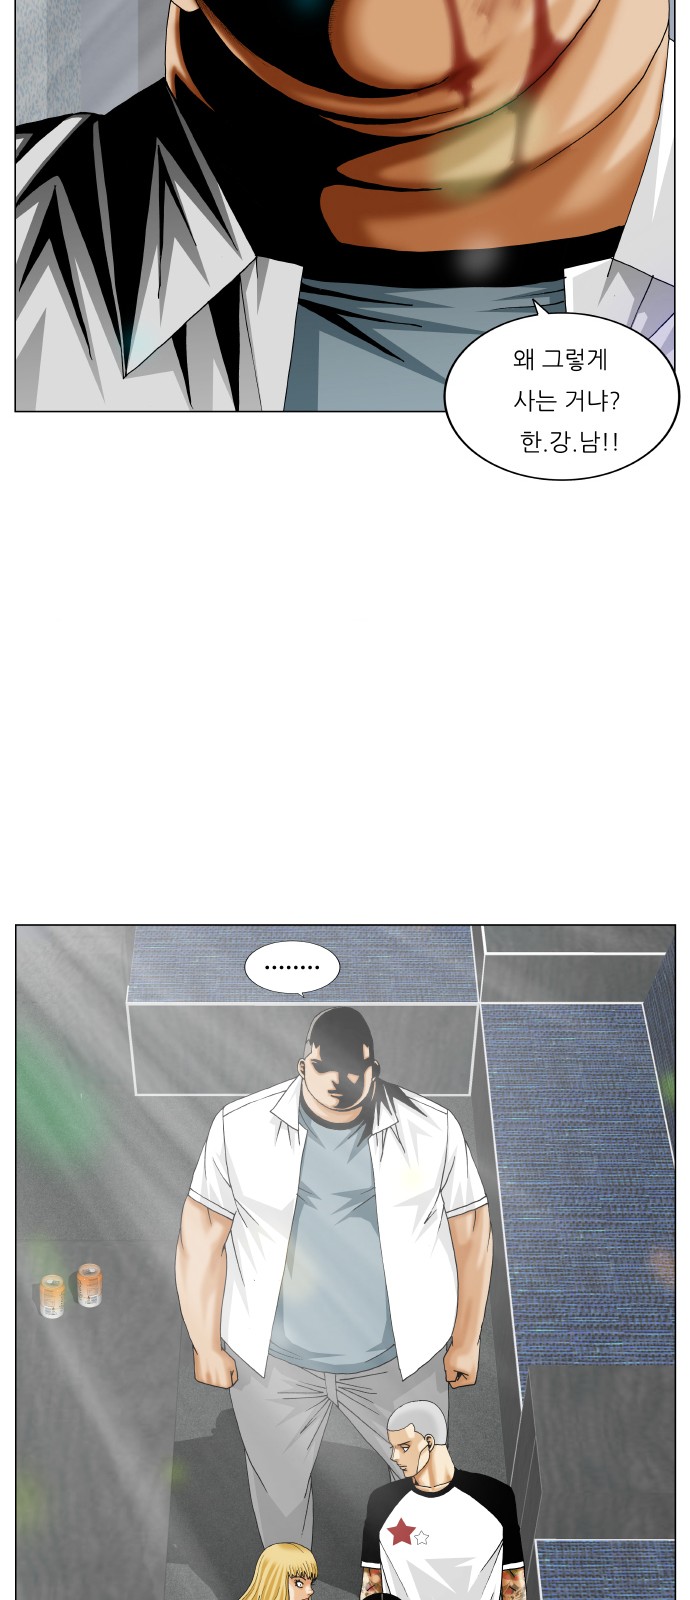 Ultimate Legend - Kang Hae Hyo - Chapter 288 - Page 4